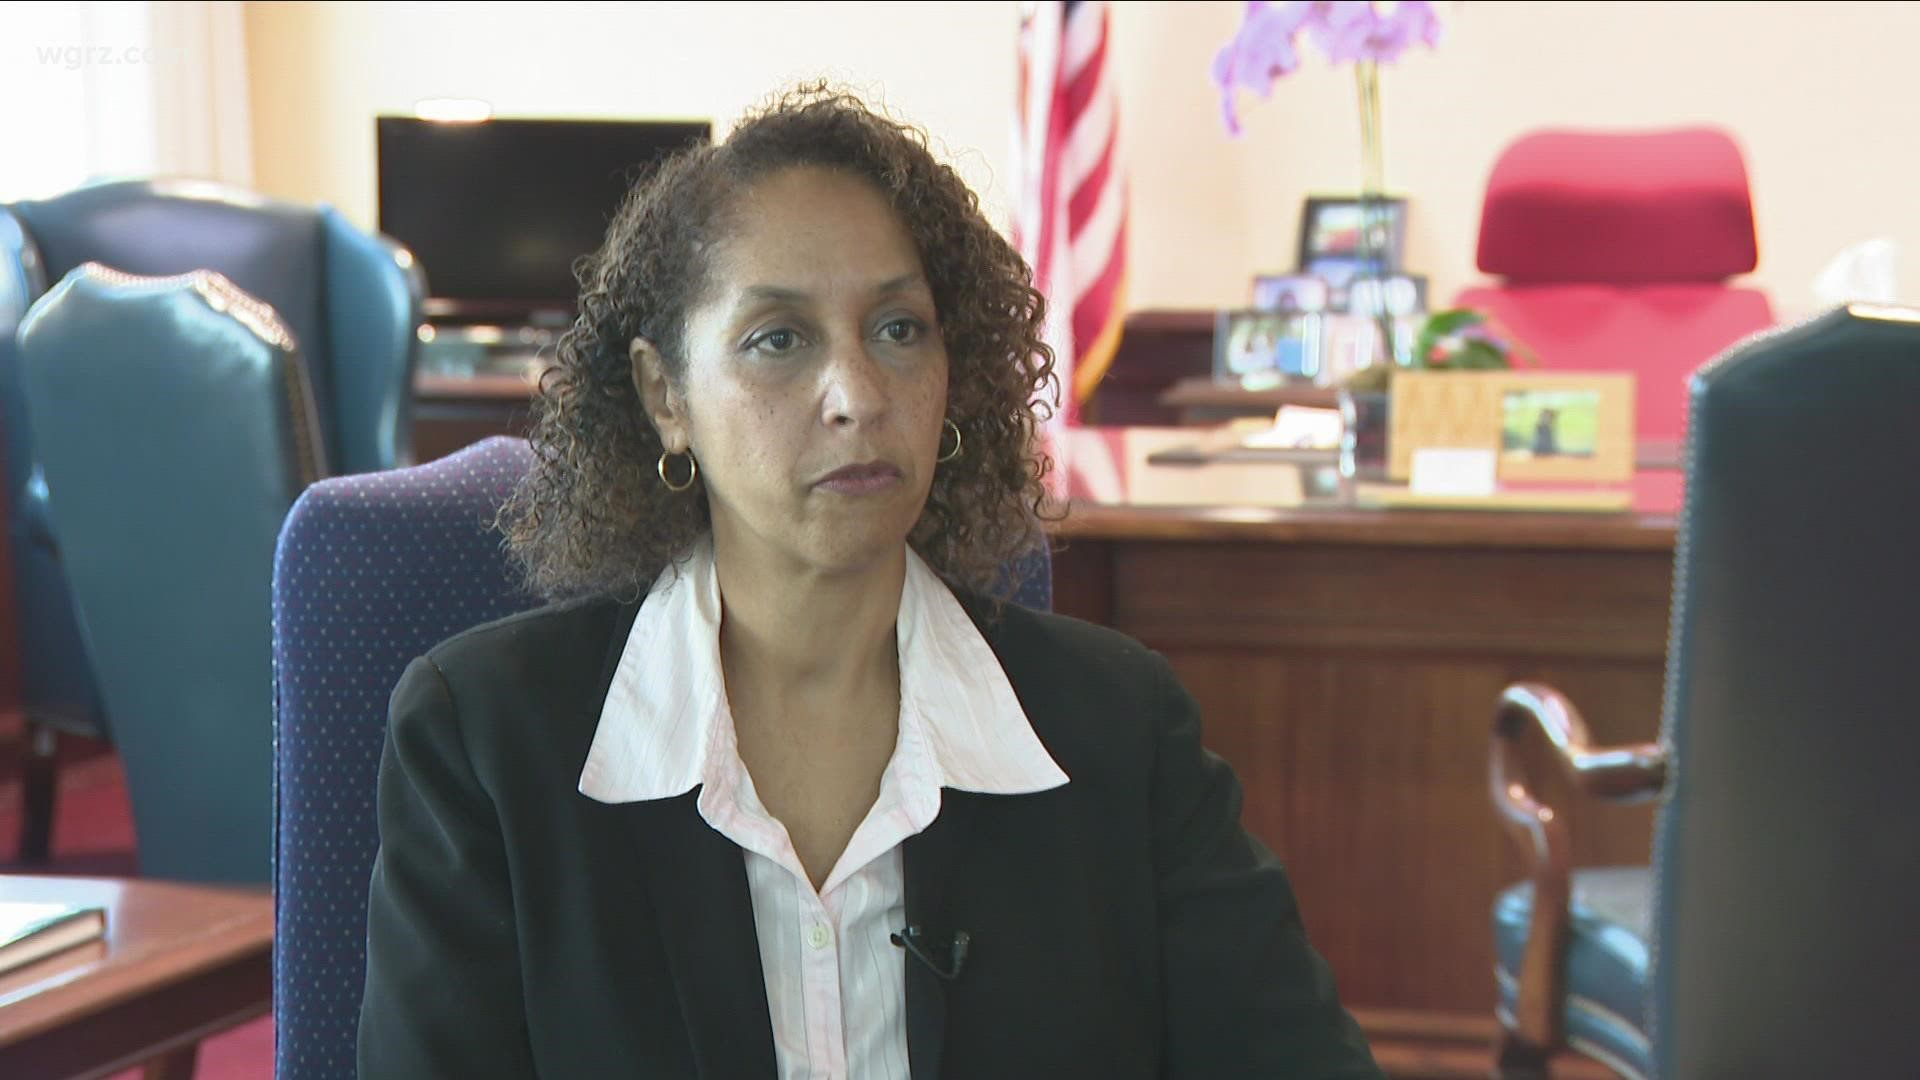 Trini Ross is making history as the new U.S. Attorney for the Western District of New York. She is the first Black woman to oversee that office.